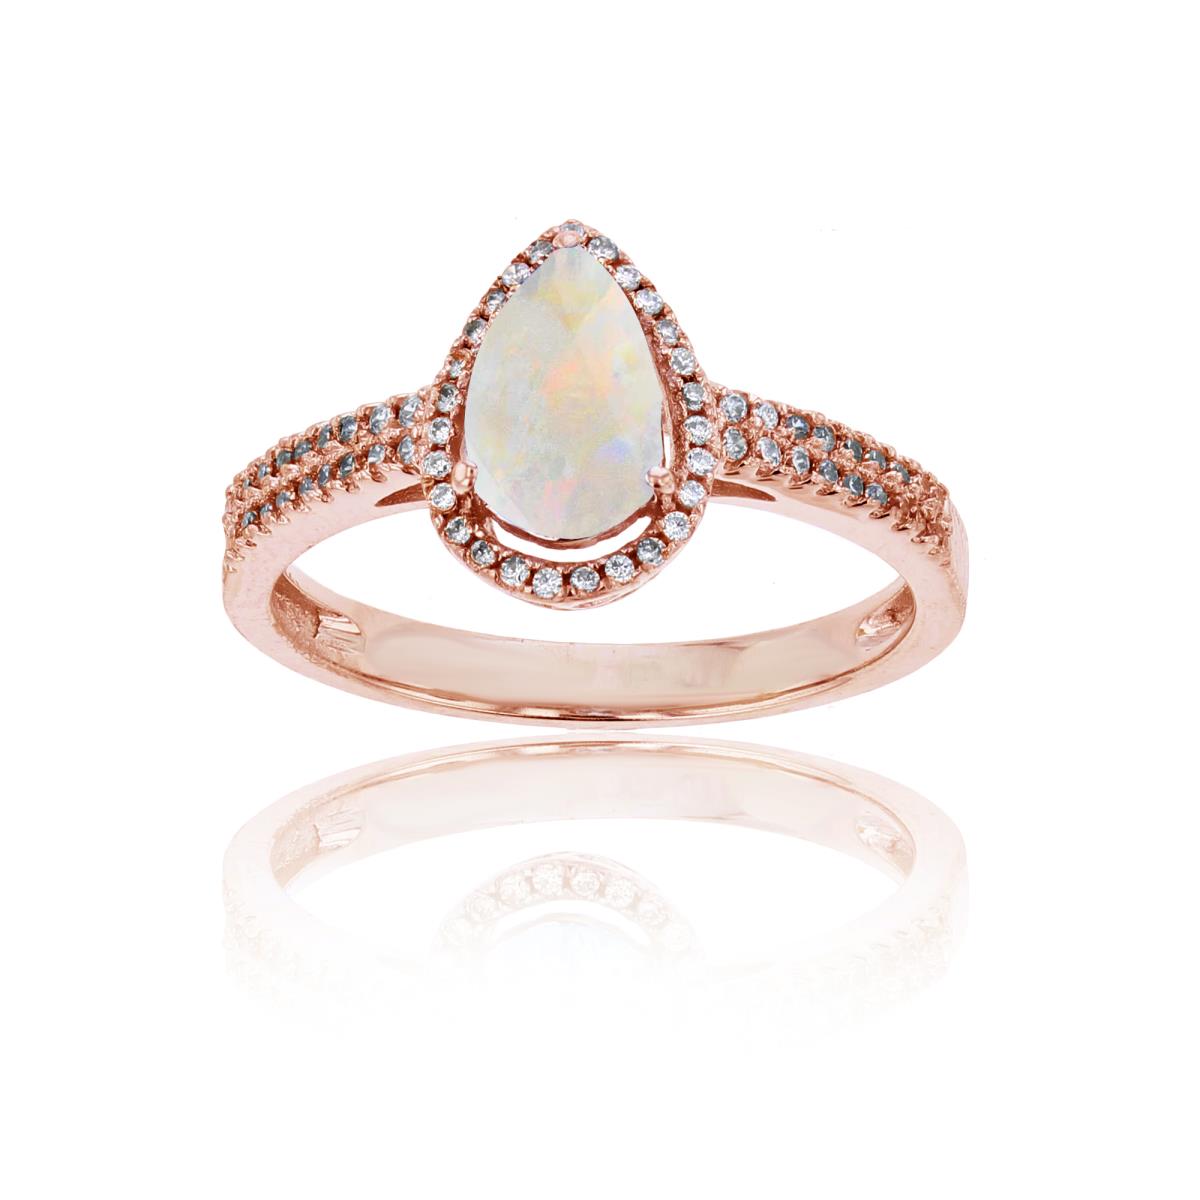 14K Rose Gold 0.20 CTTW Round Diamond & 8x5mm Pear Cut Created Opal Halo Ring